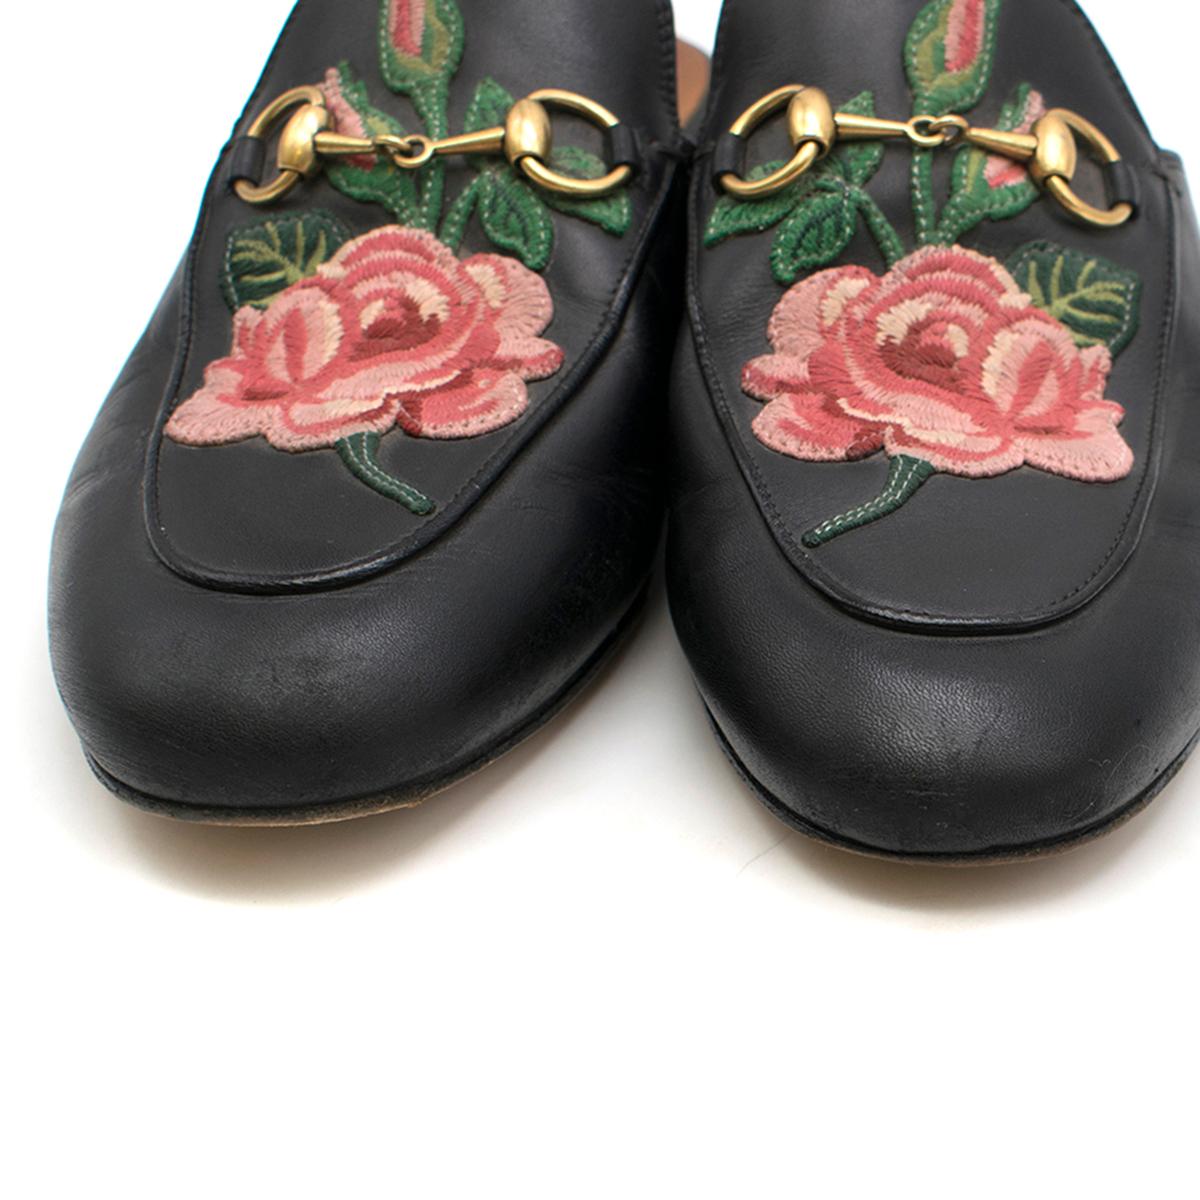 Women's Gucci Black Rose Embroidered Princetown Slippers 37.5